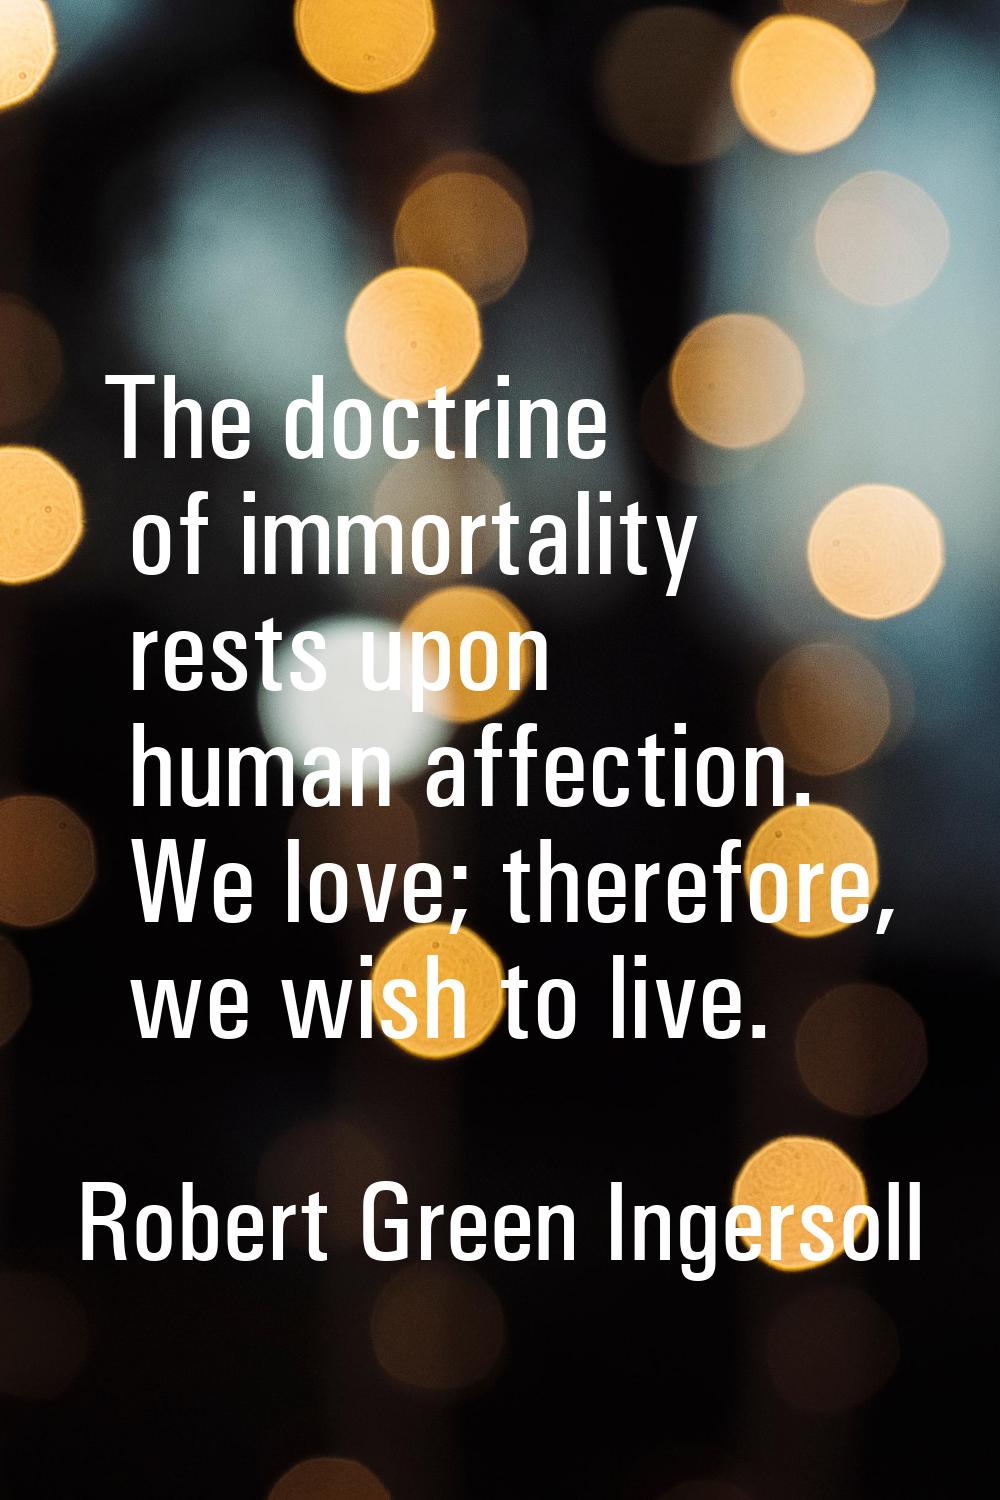 The doctrine of immortality rests upon human affection. We love; therefore, we wish to live.